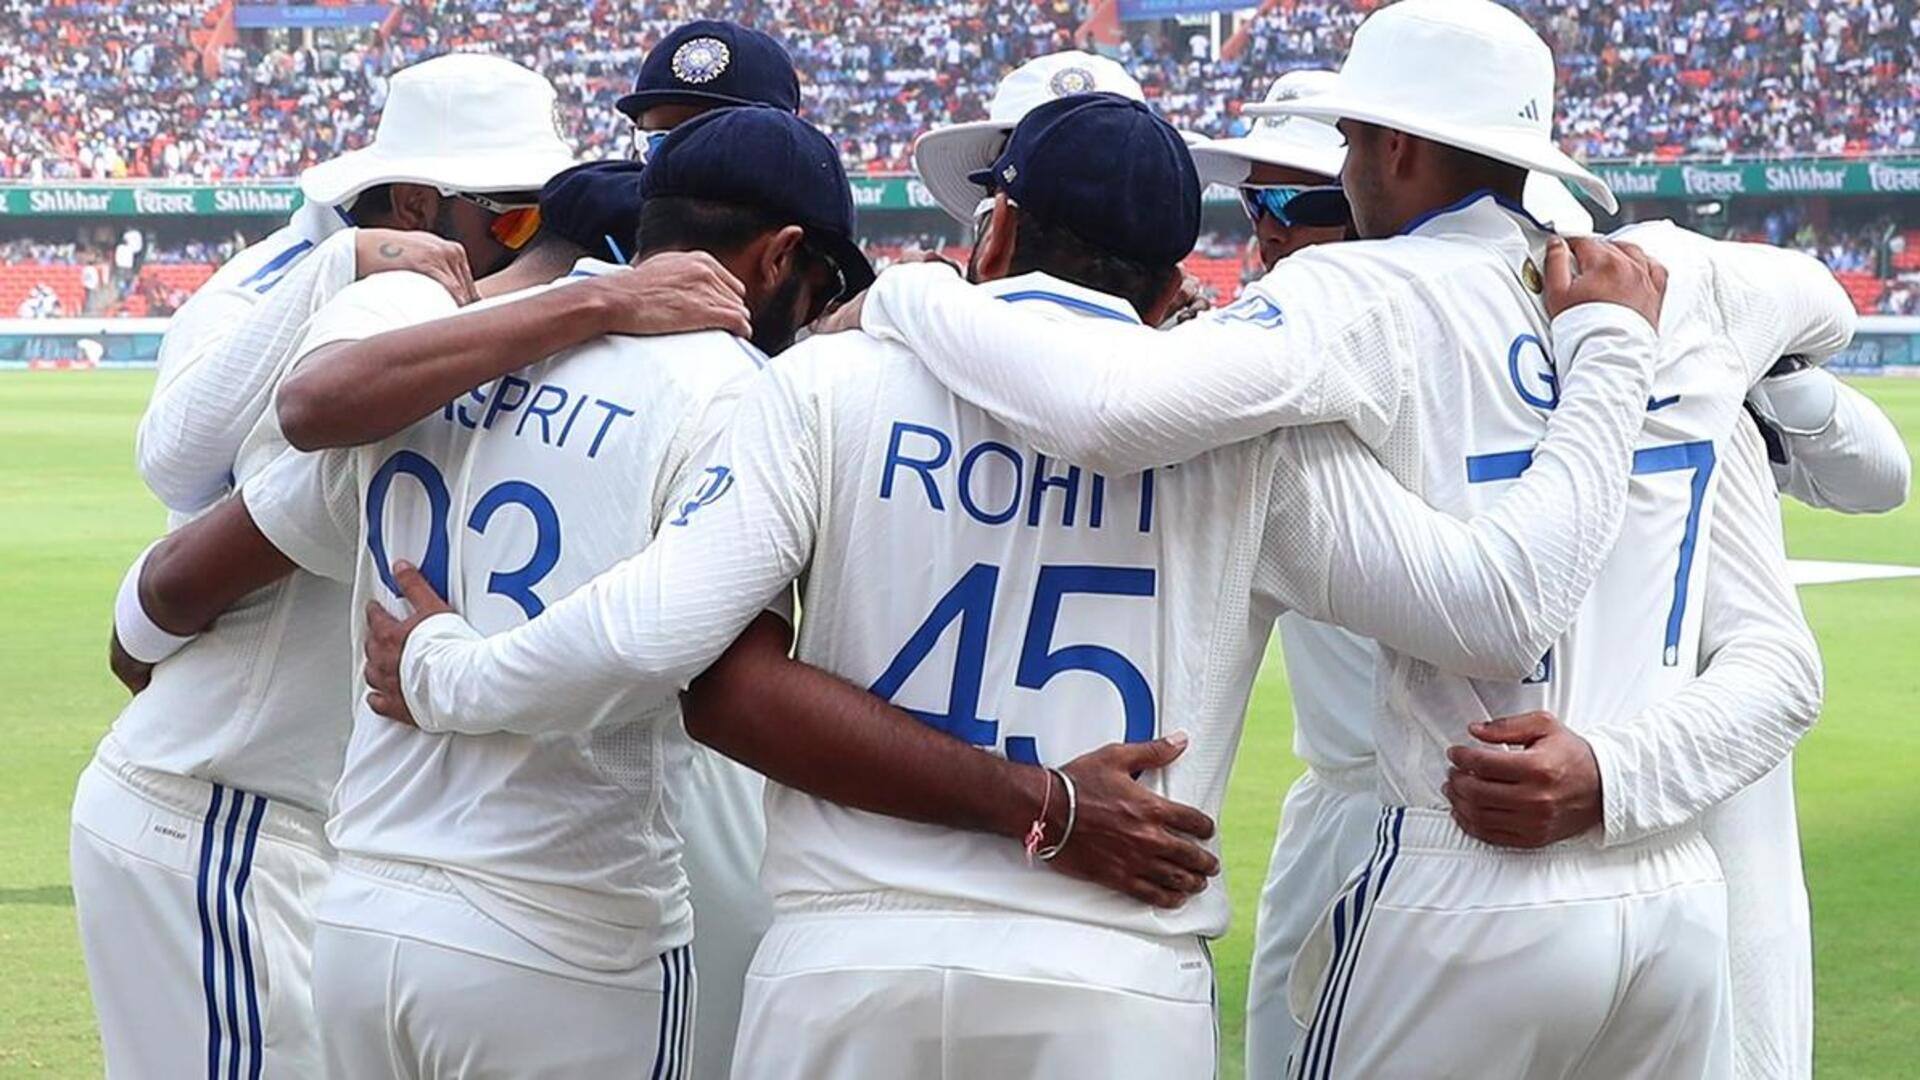 India lose first-ever home Test after leading by 70+ runs